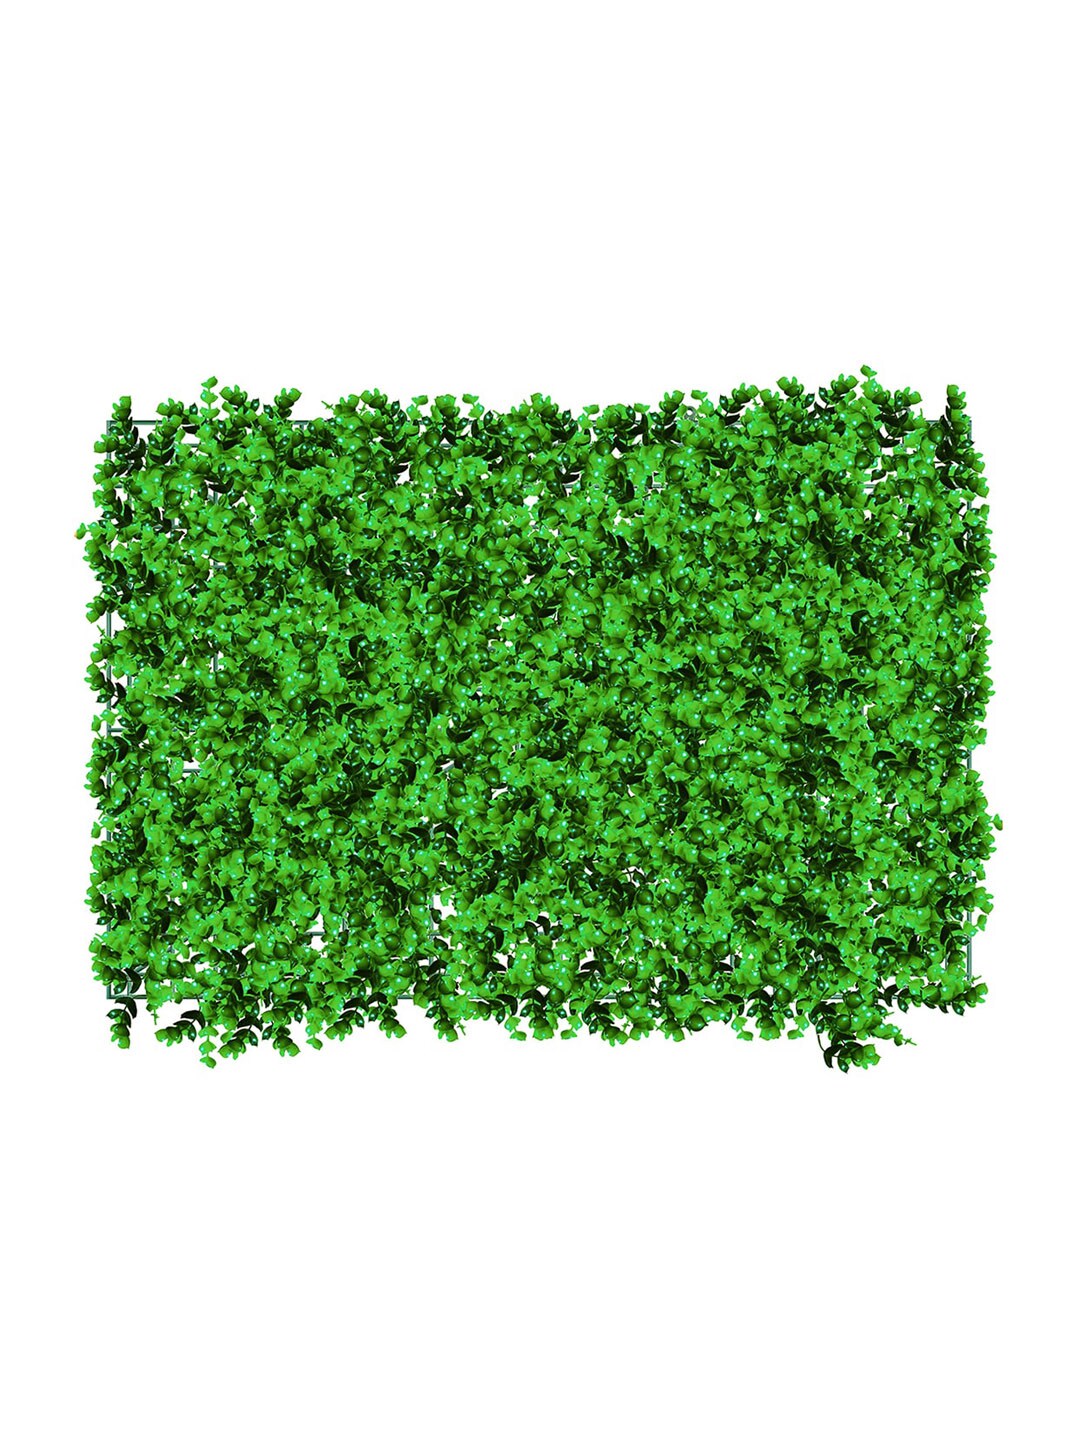 Story@home Green Rectangular Artificial Grass Wall Decor Price in India